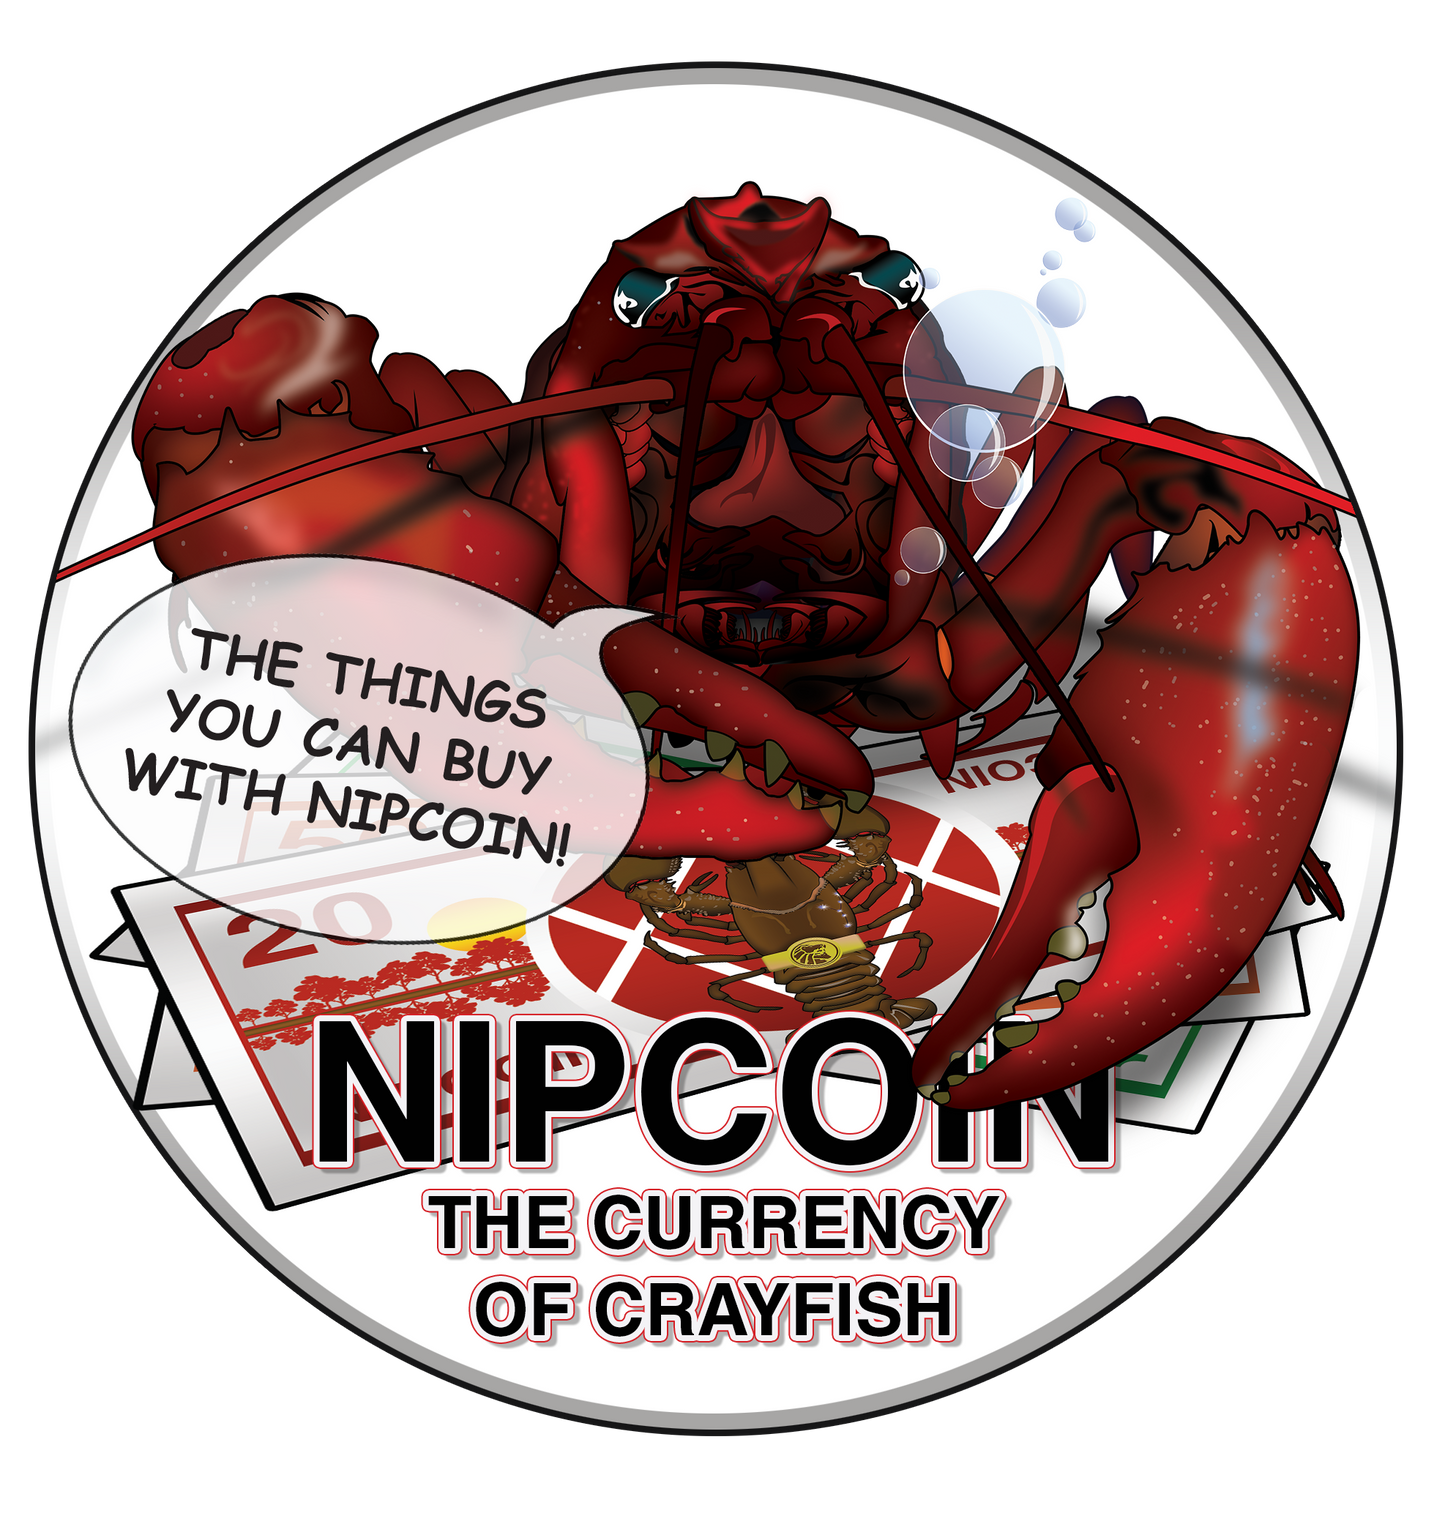 NIPCOIN - THE CURRENCY OF CRAYFISH